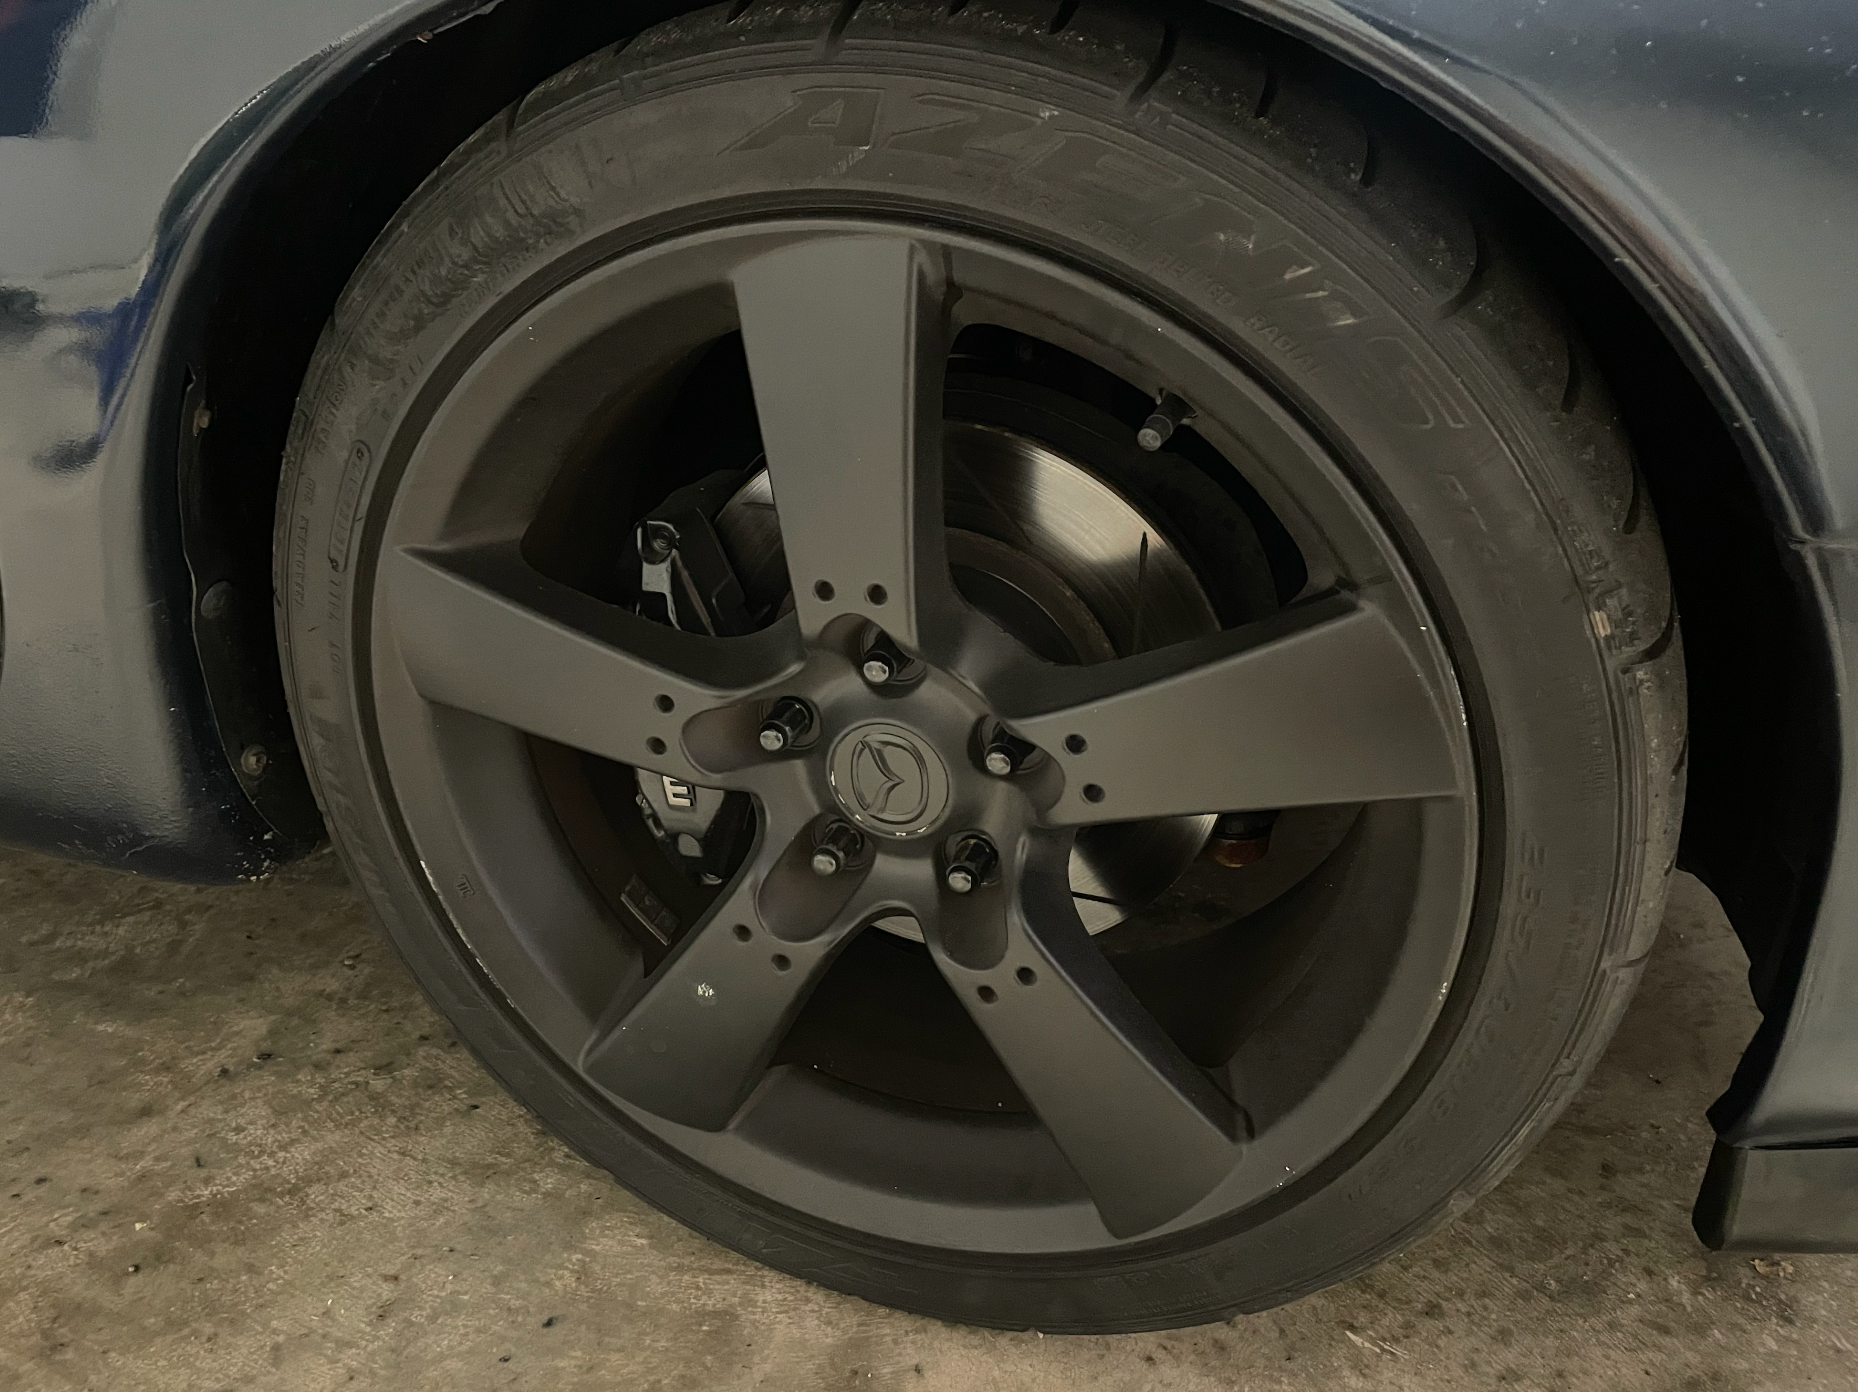 Wheels and Tires/Axles - 18" RX-8 Wheels and Tires - Used - 1993 to 2002 Mazda RX-7 - Fort Worth, TX 76111, United States